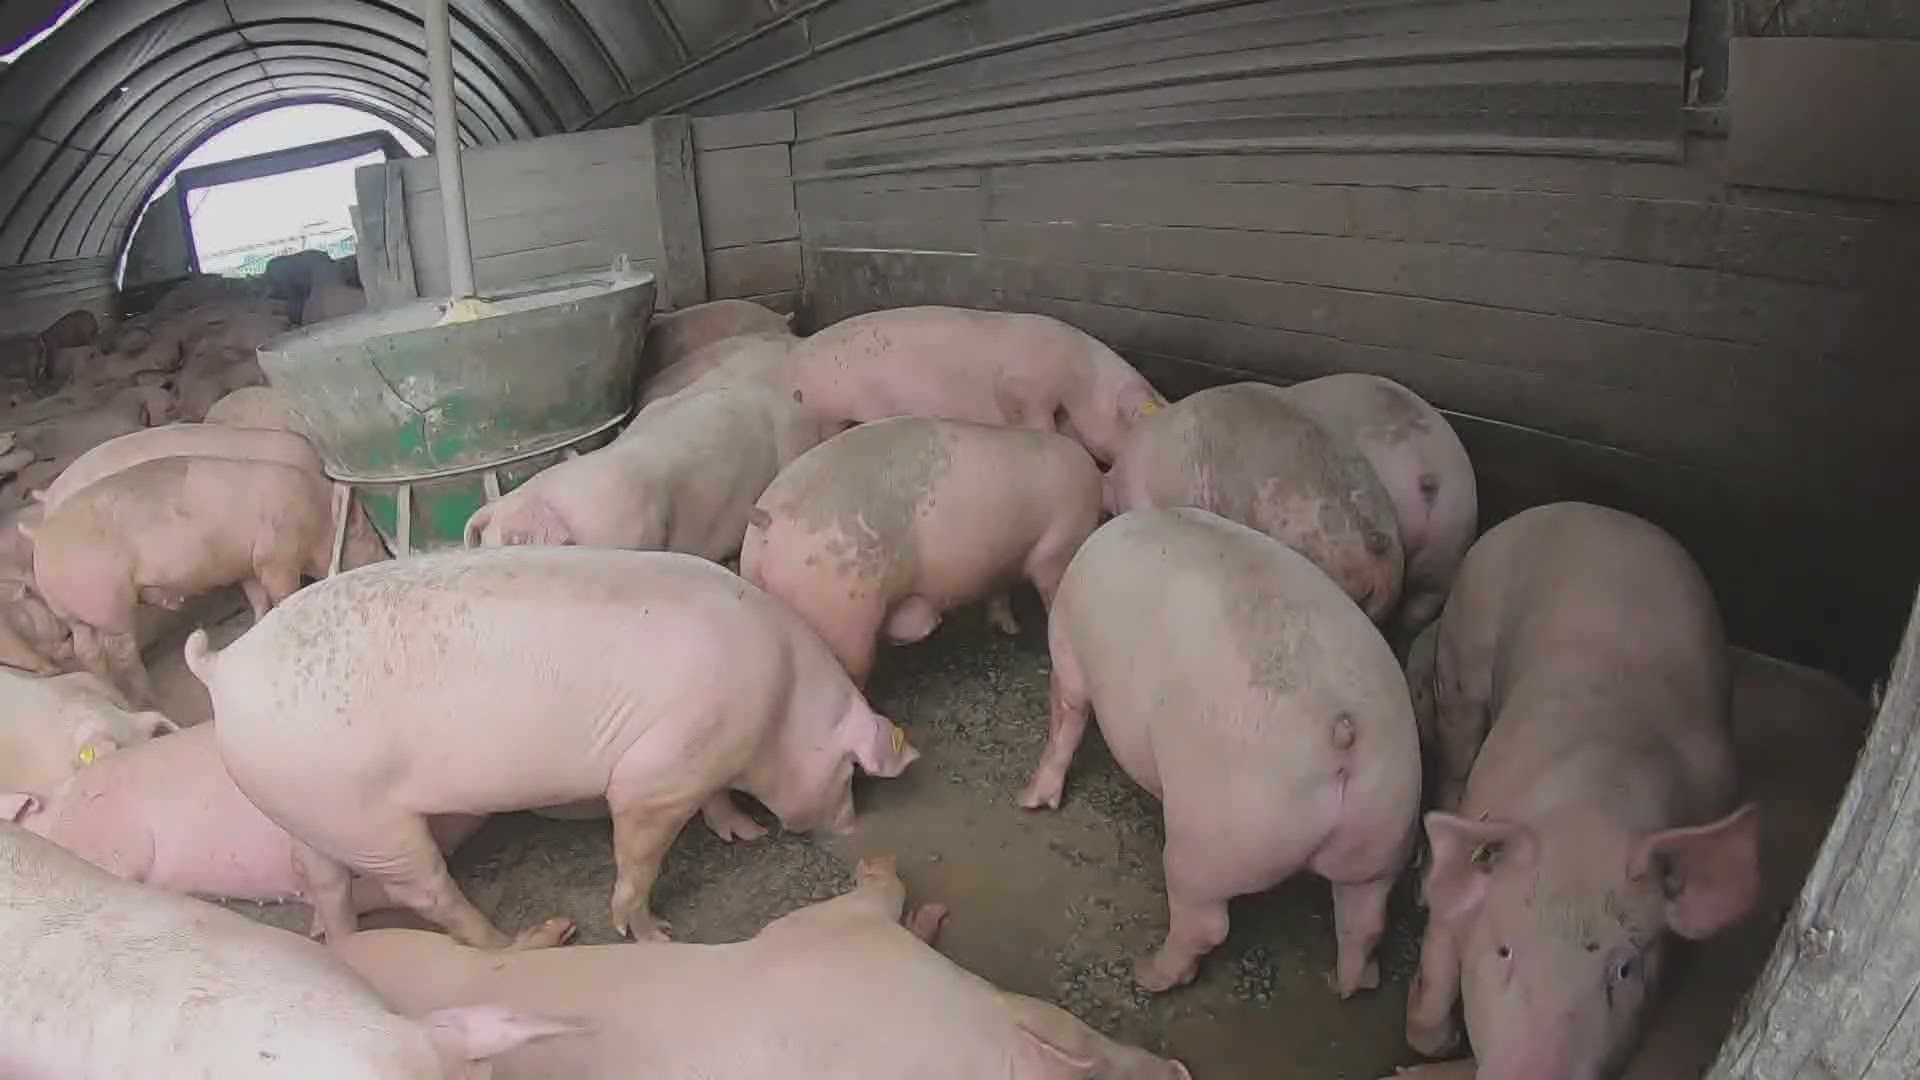 Pig farmers feeling the impact from Monday's derecho storm